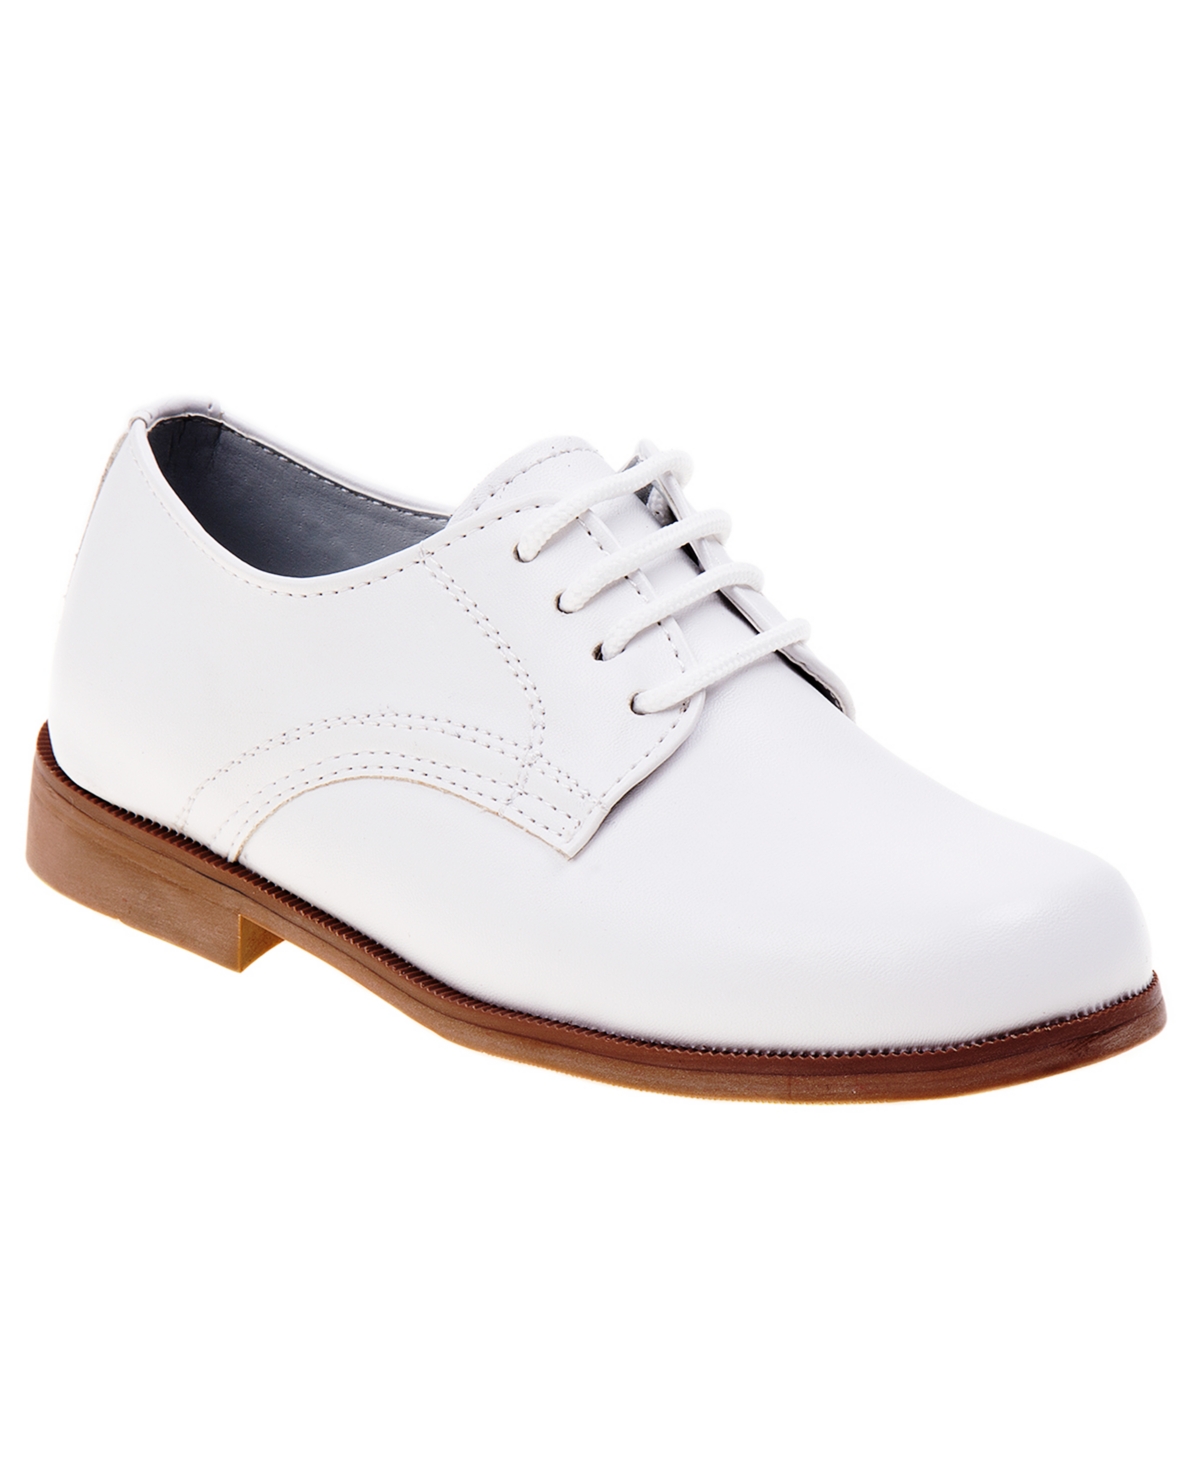 Josmo Kids' Big Boys Lace Up Dress Shoes In White